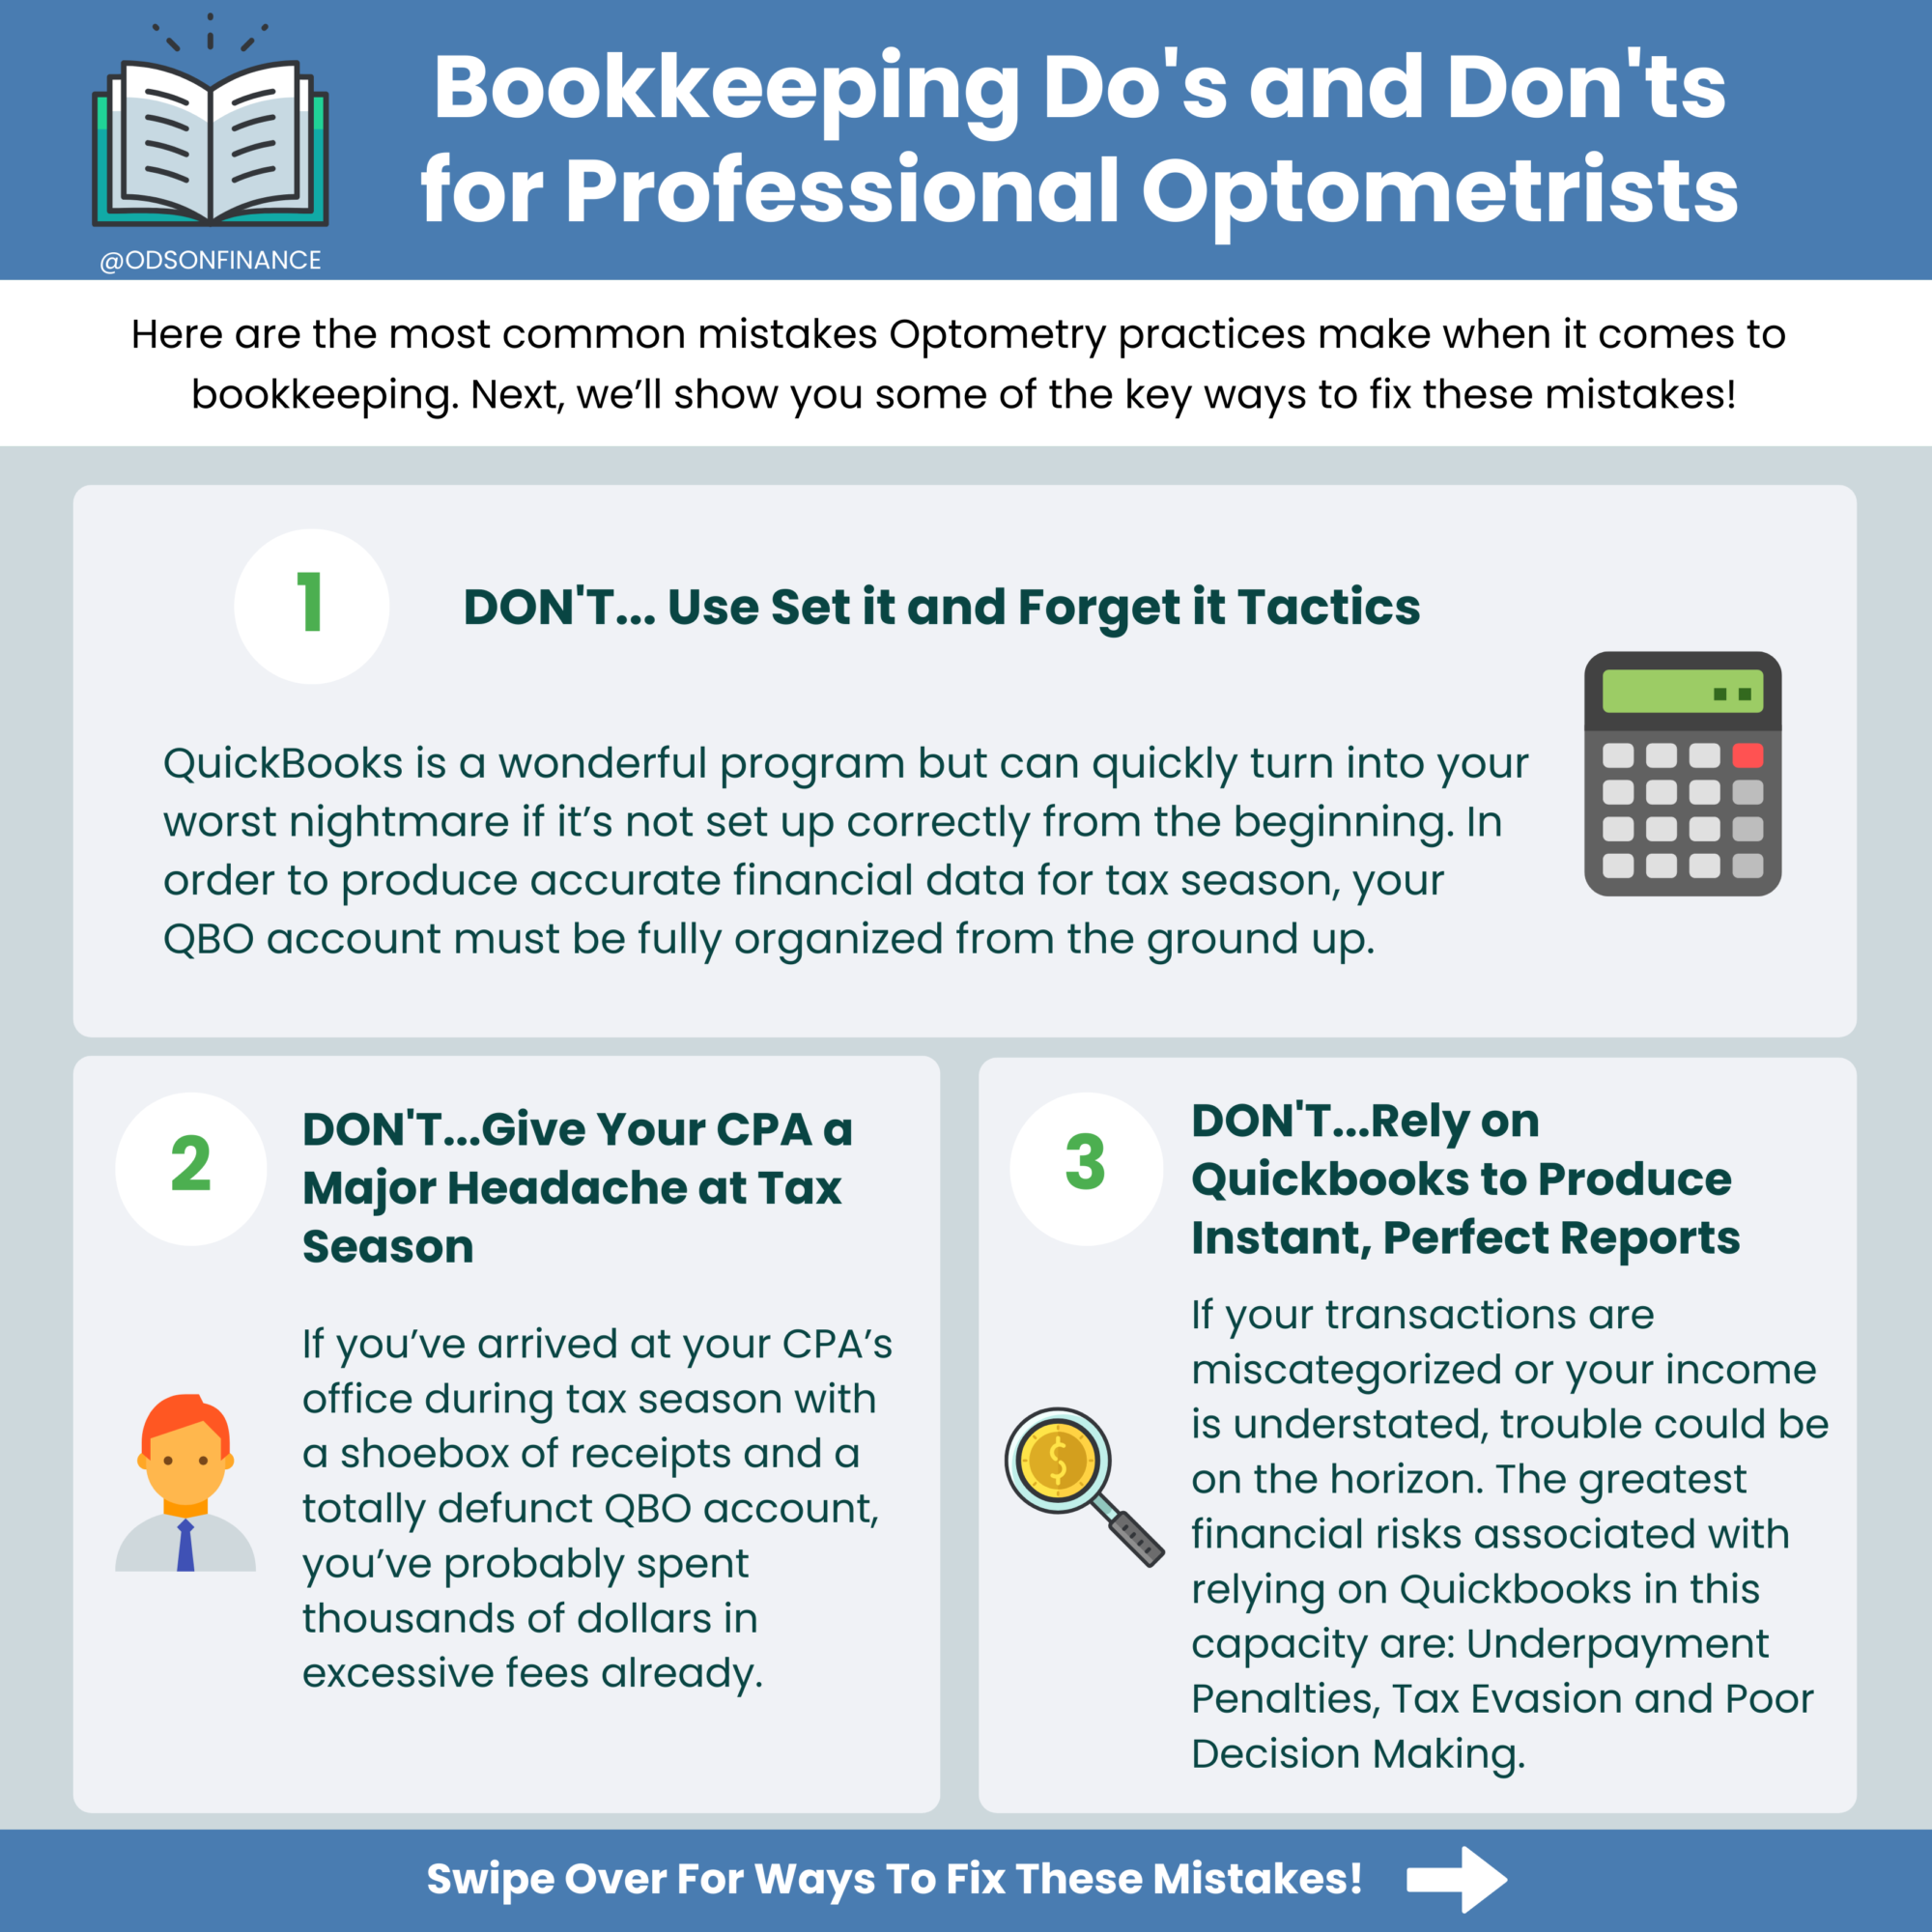 Bookkeeping Do's and Don'ts for Professional Optometrists